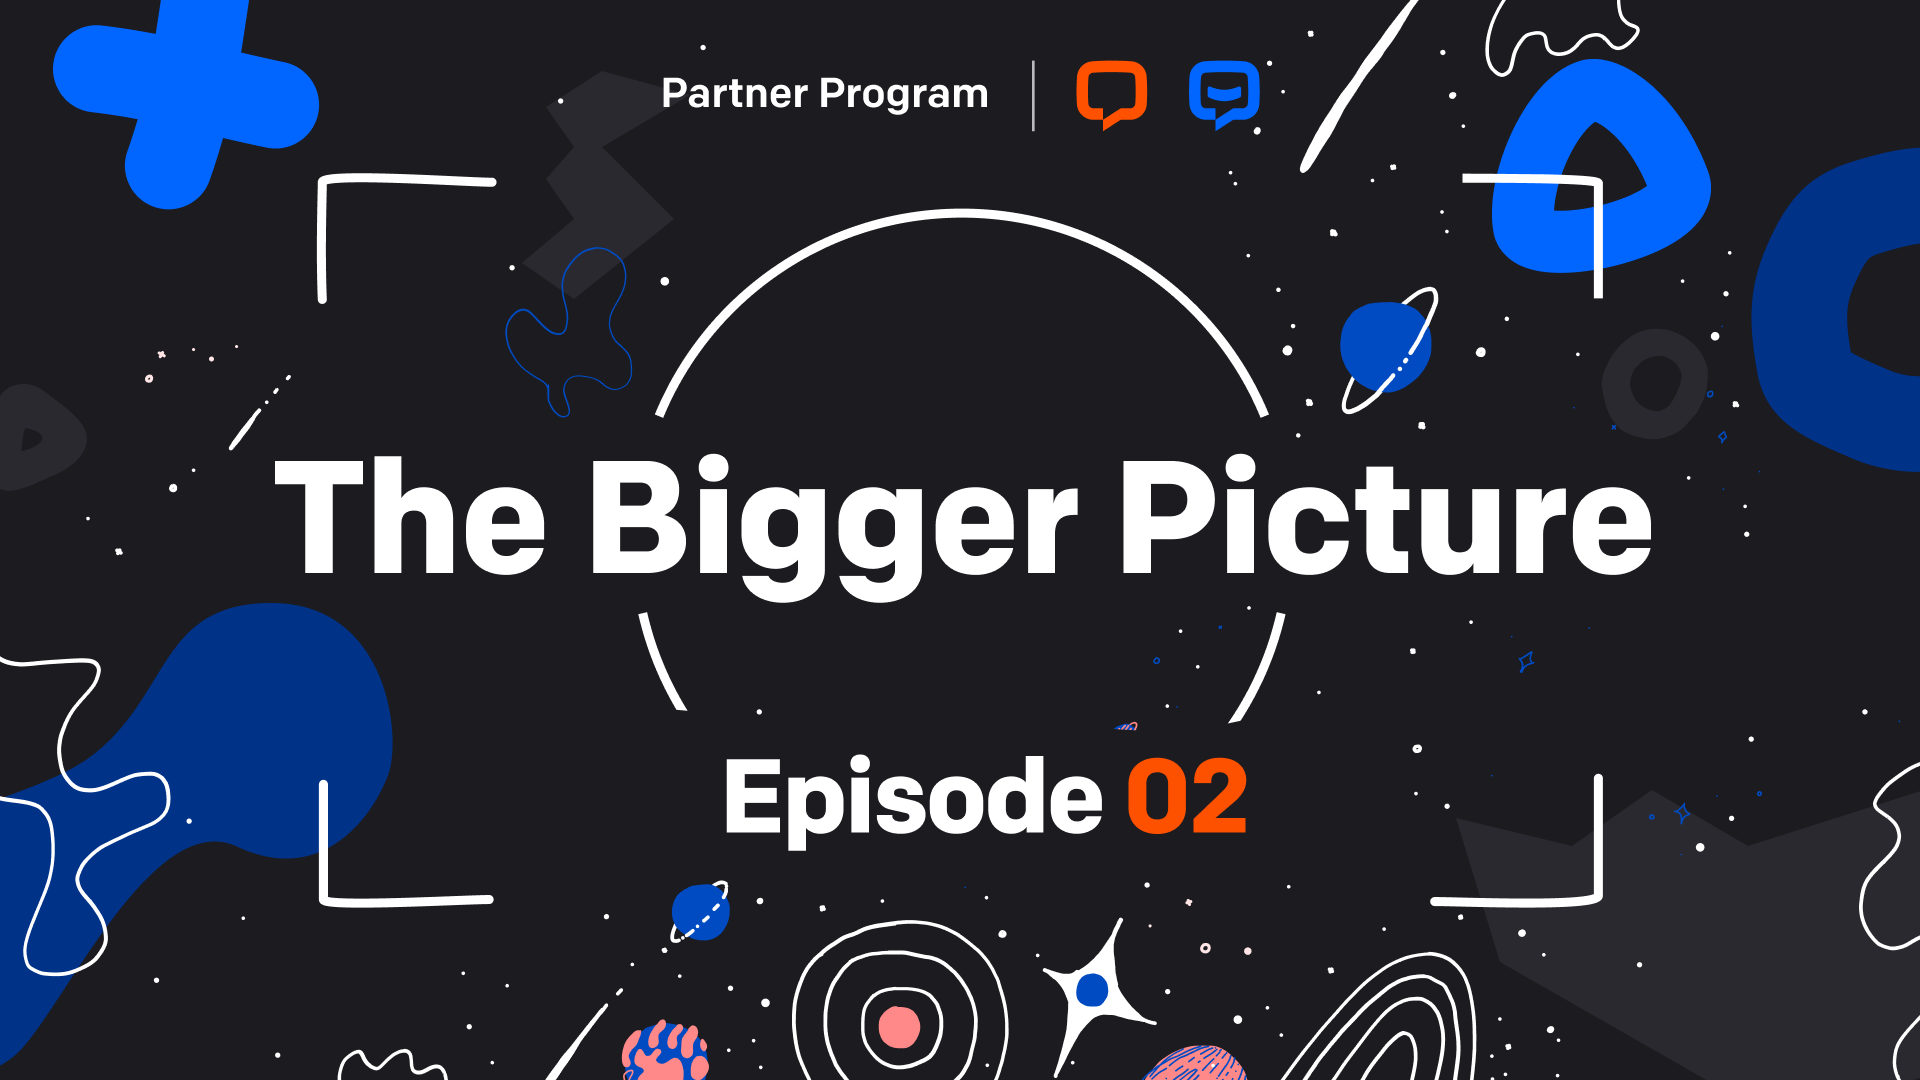 The new episode of The Bigger Picture is out!